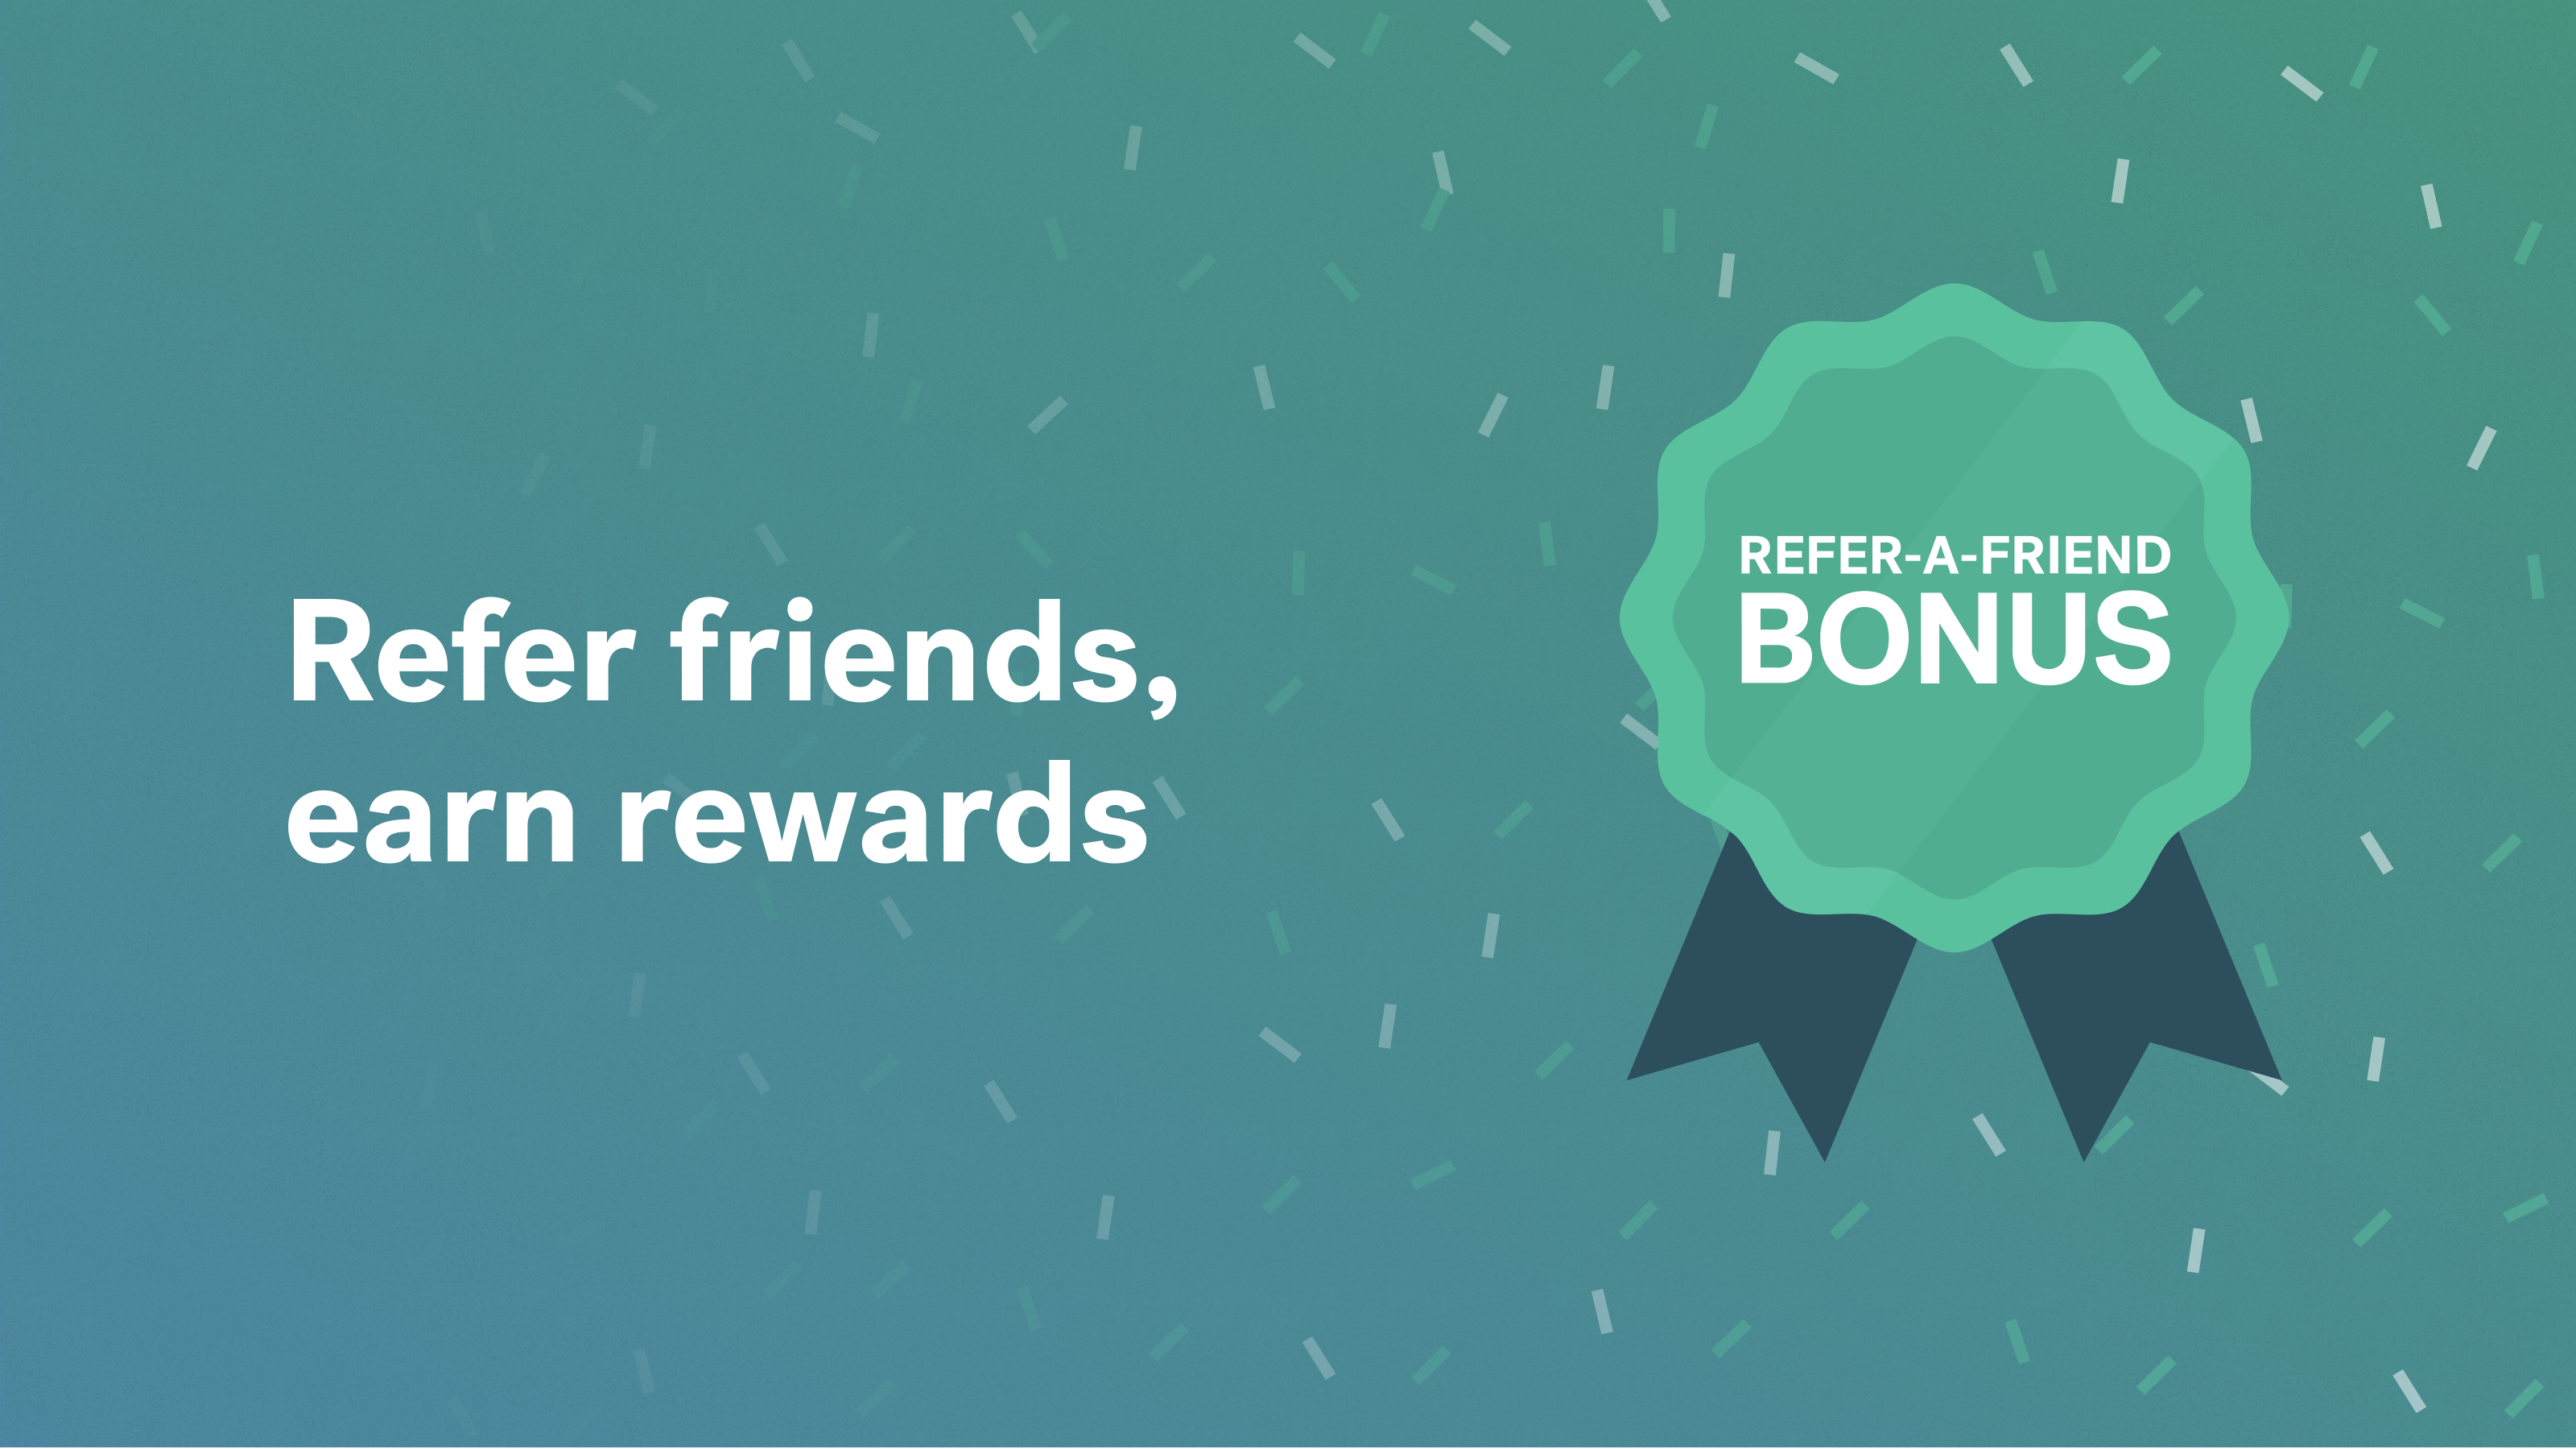 This January, refer a friend for a €50 referral reward (each!)